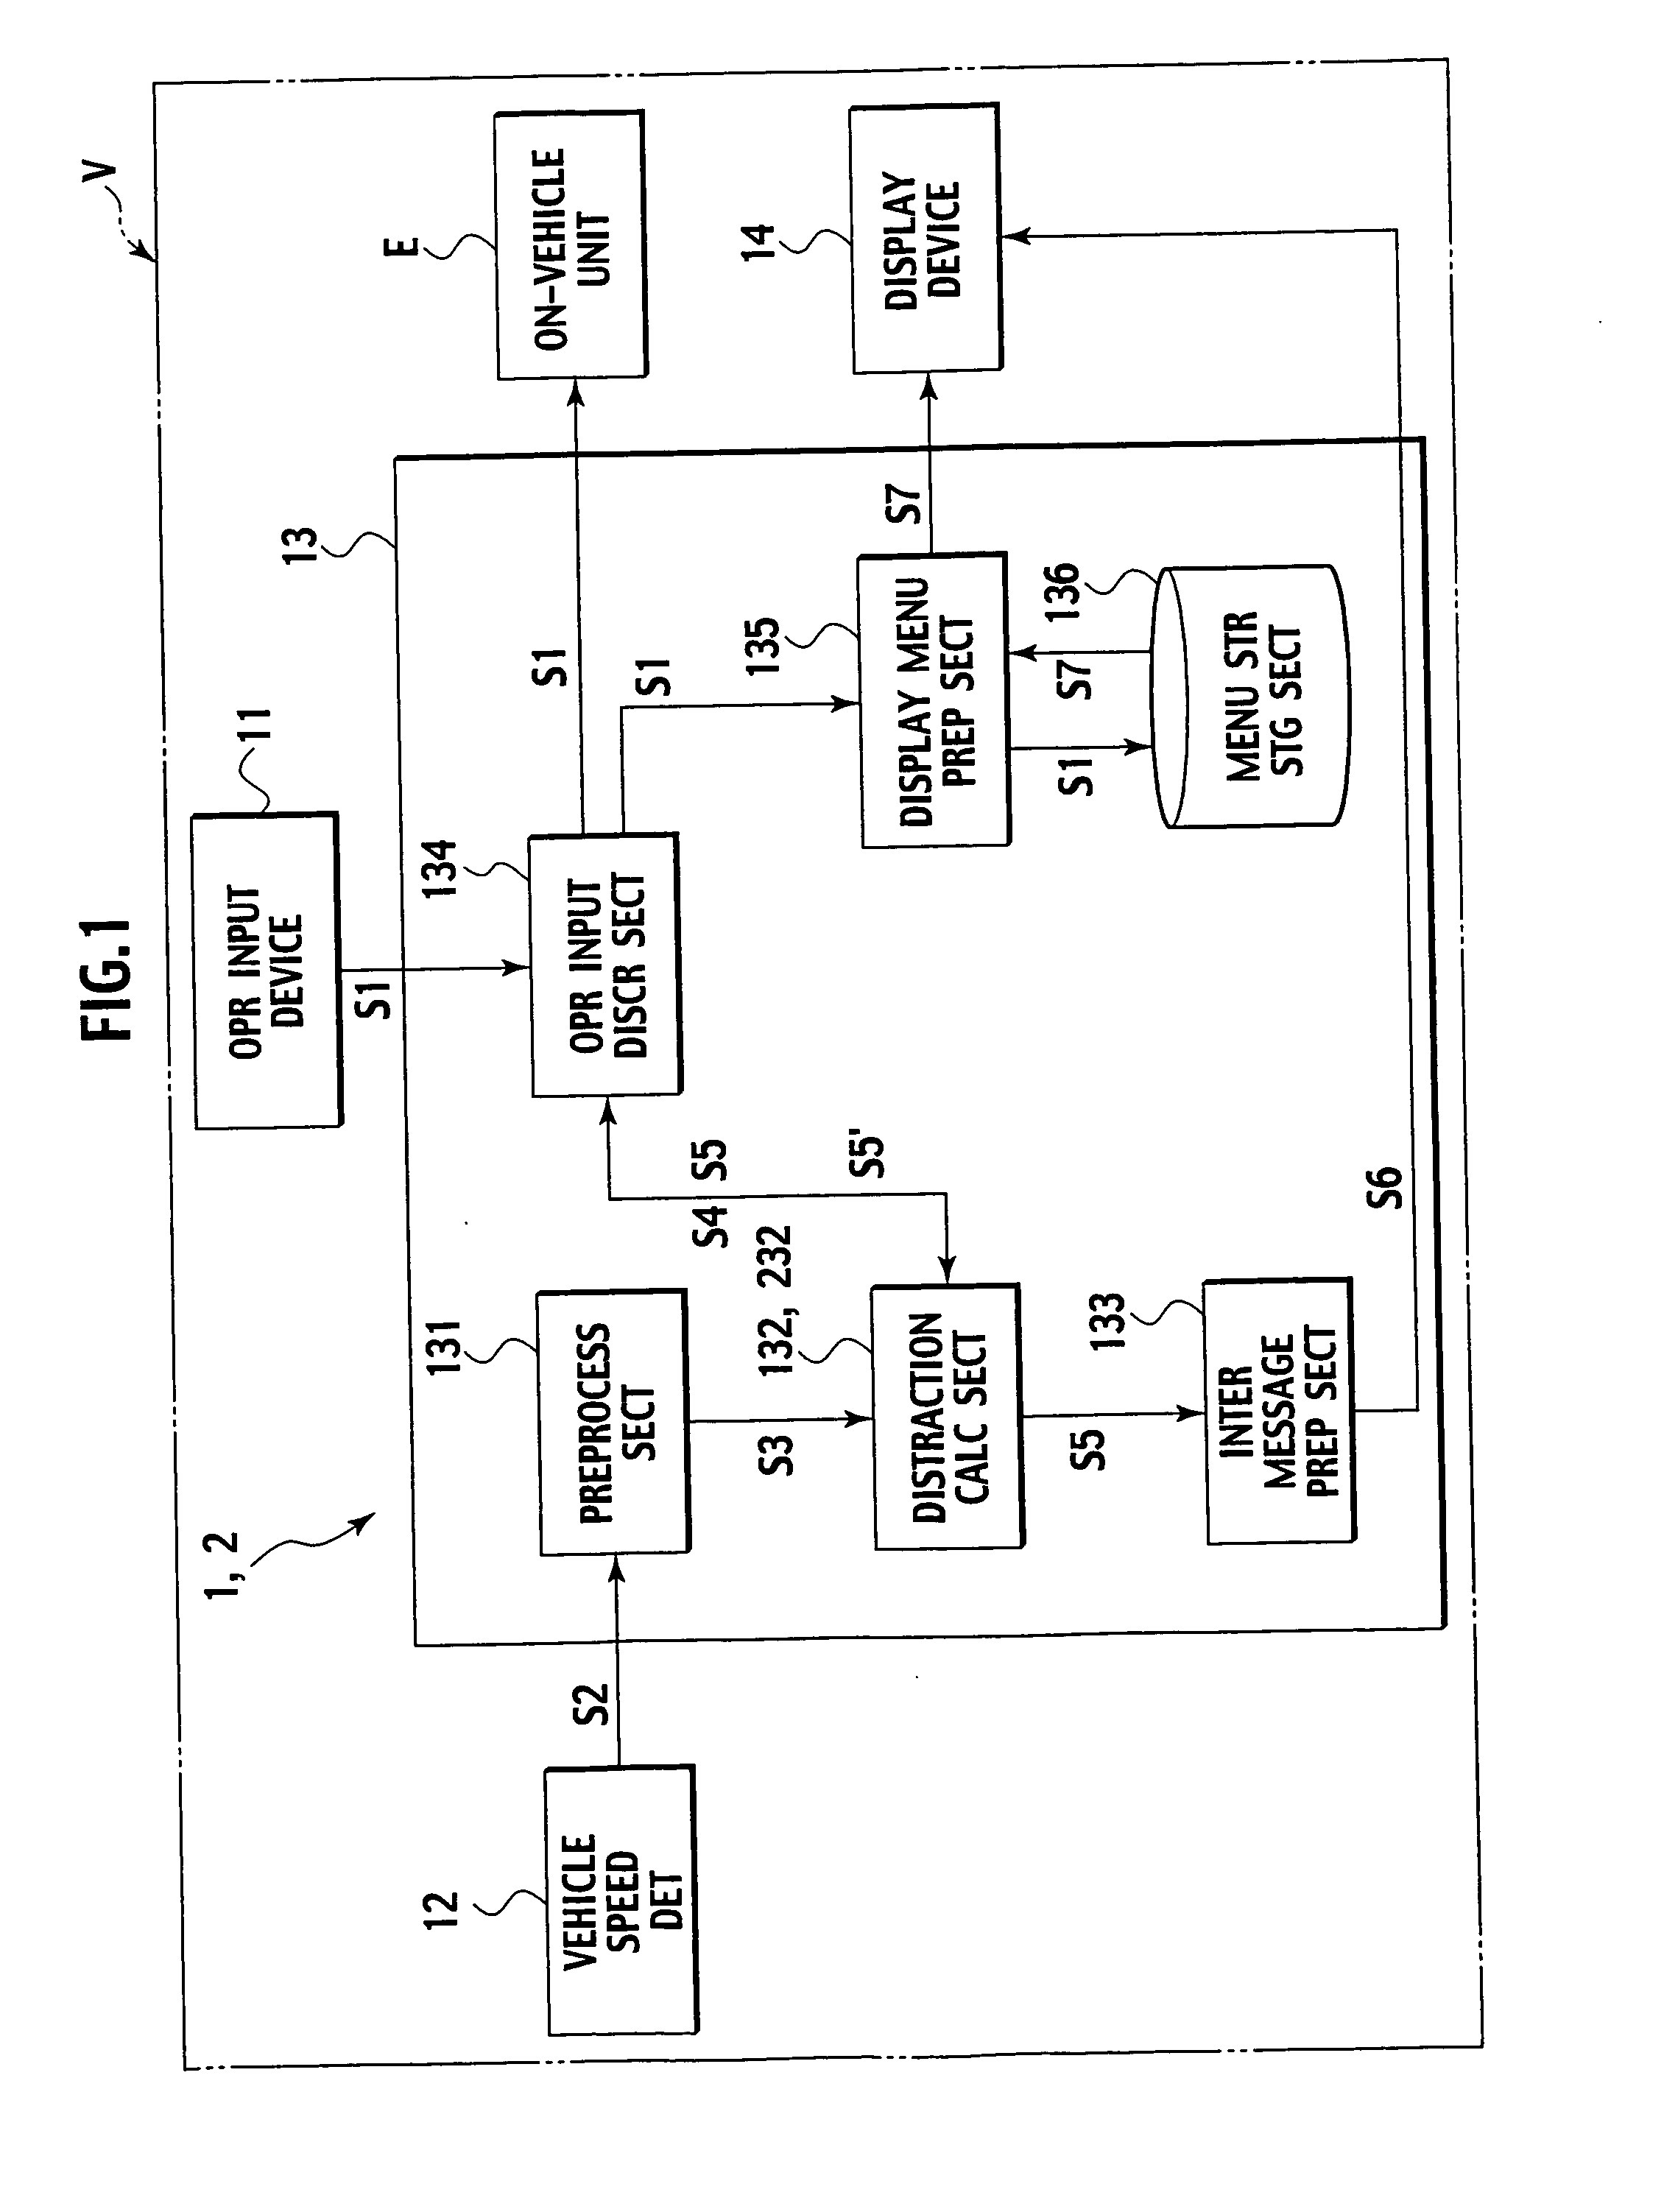 Driving status detection device and related method